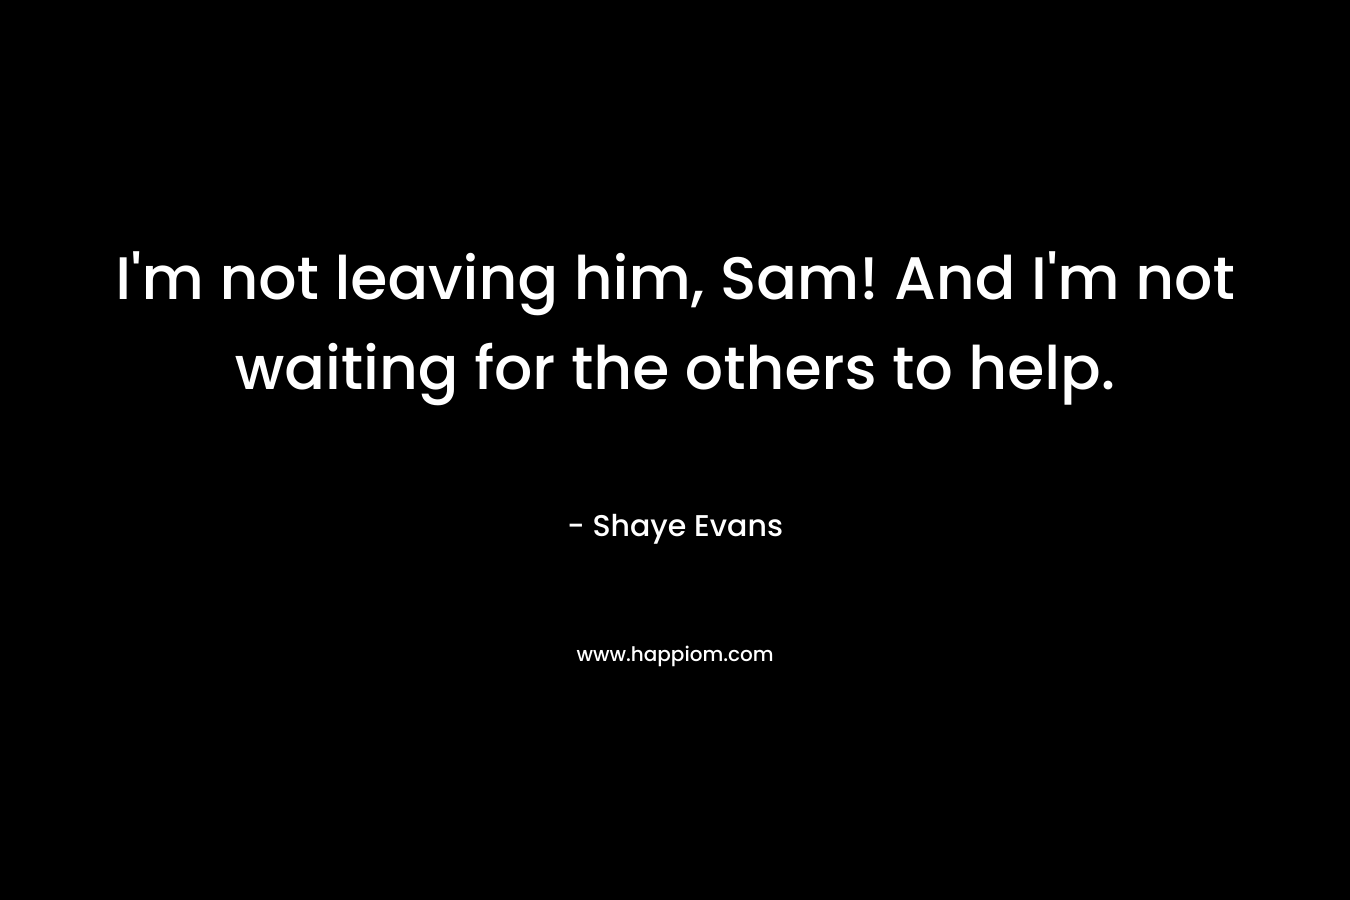 I’m not leaving him, Sam! And I’m not waiting for the others to help. – Shaye Evans